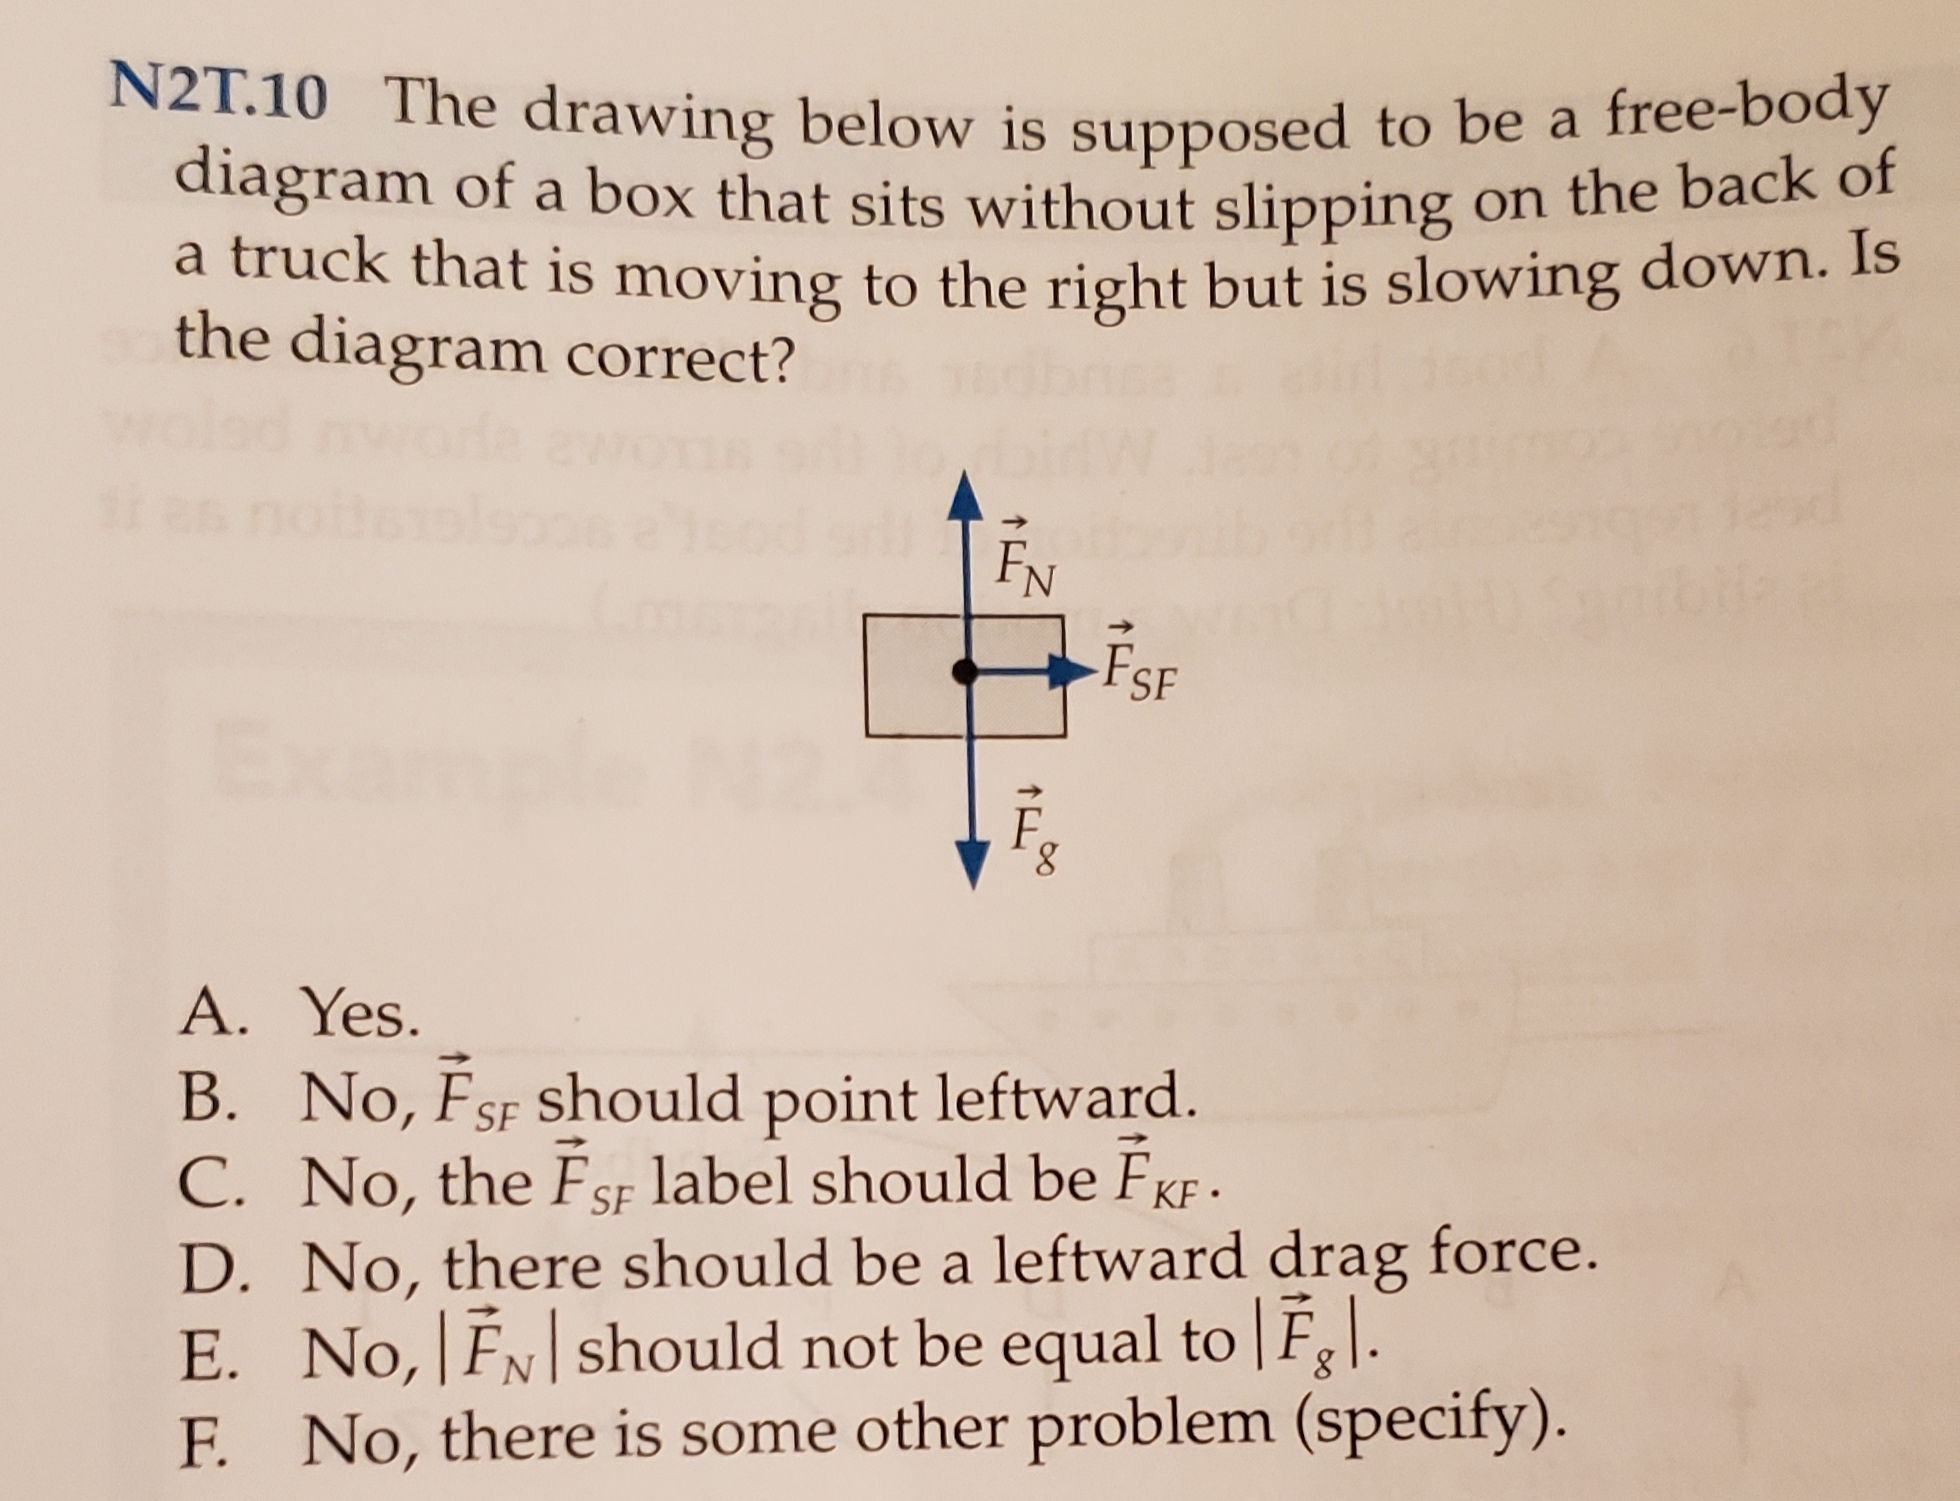 N2T.10 The drawing below is supposed to be a free-body
diagram of a box that sits without slipping on the back of
a truck that is moving to the right but is slowing down. Is
the diagram correct?
FN
FSF
A. Yes
B. No, FsF should point leftward.
C. No, the FSF label should be FKF
D. No, there should be a leftward drag force.
E. No, FN should not be equal to Fgl.
F. No, there is some other problem (specify).
